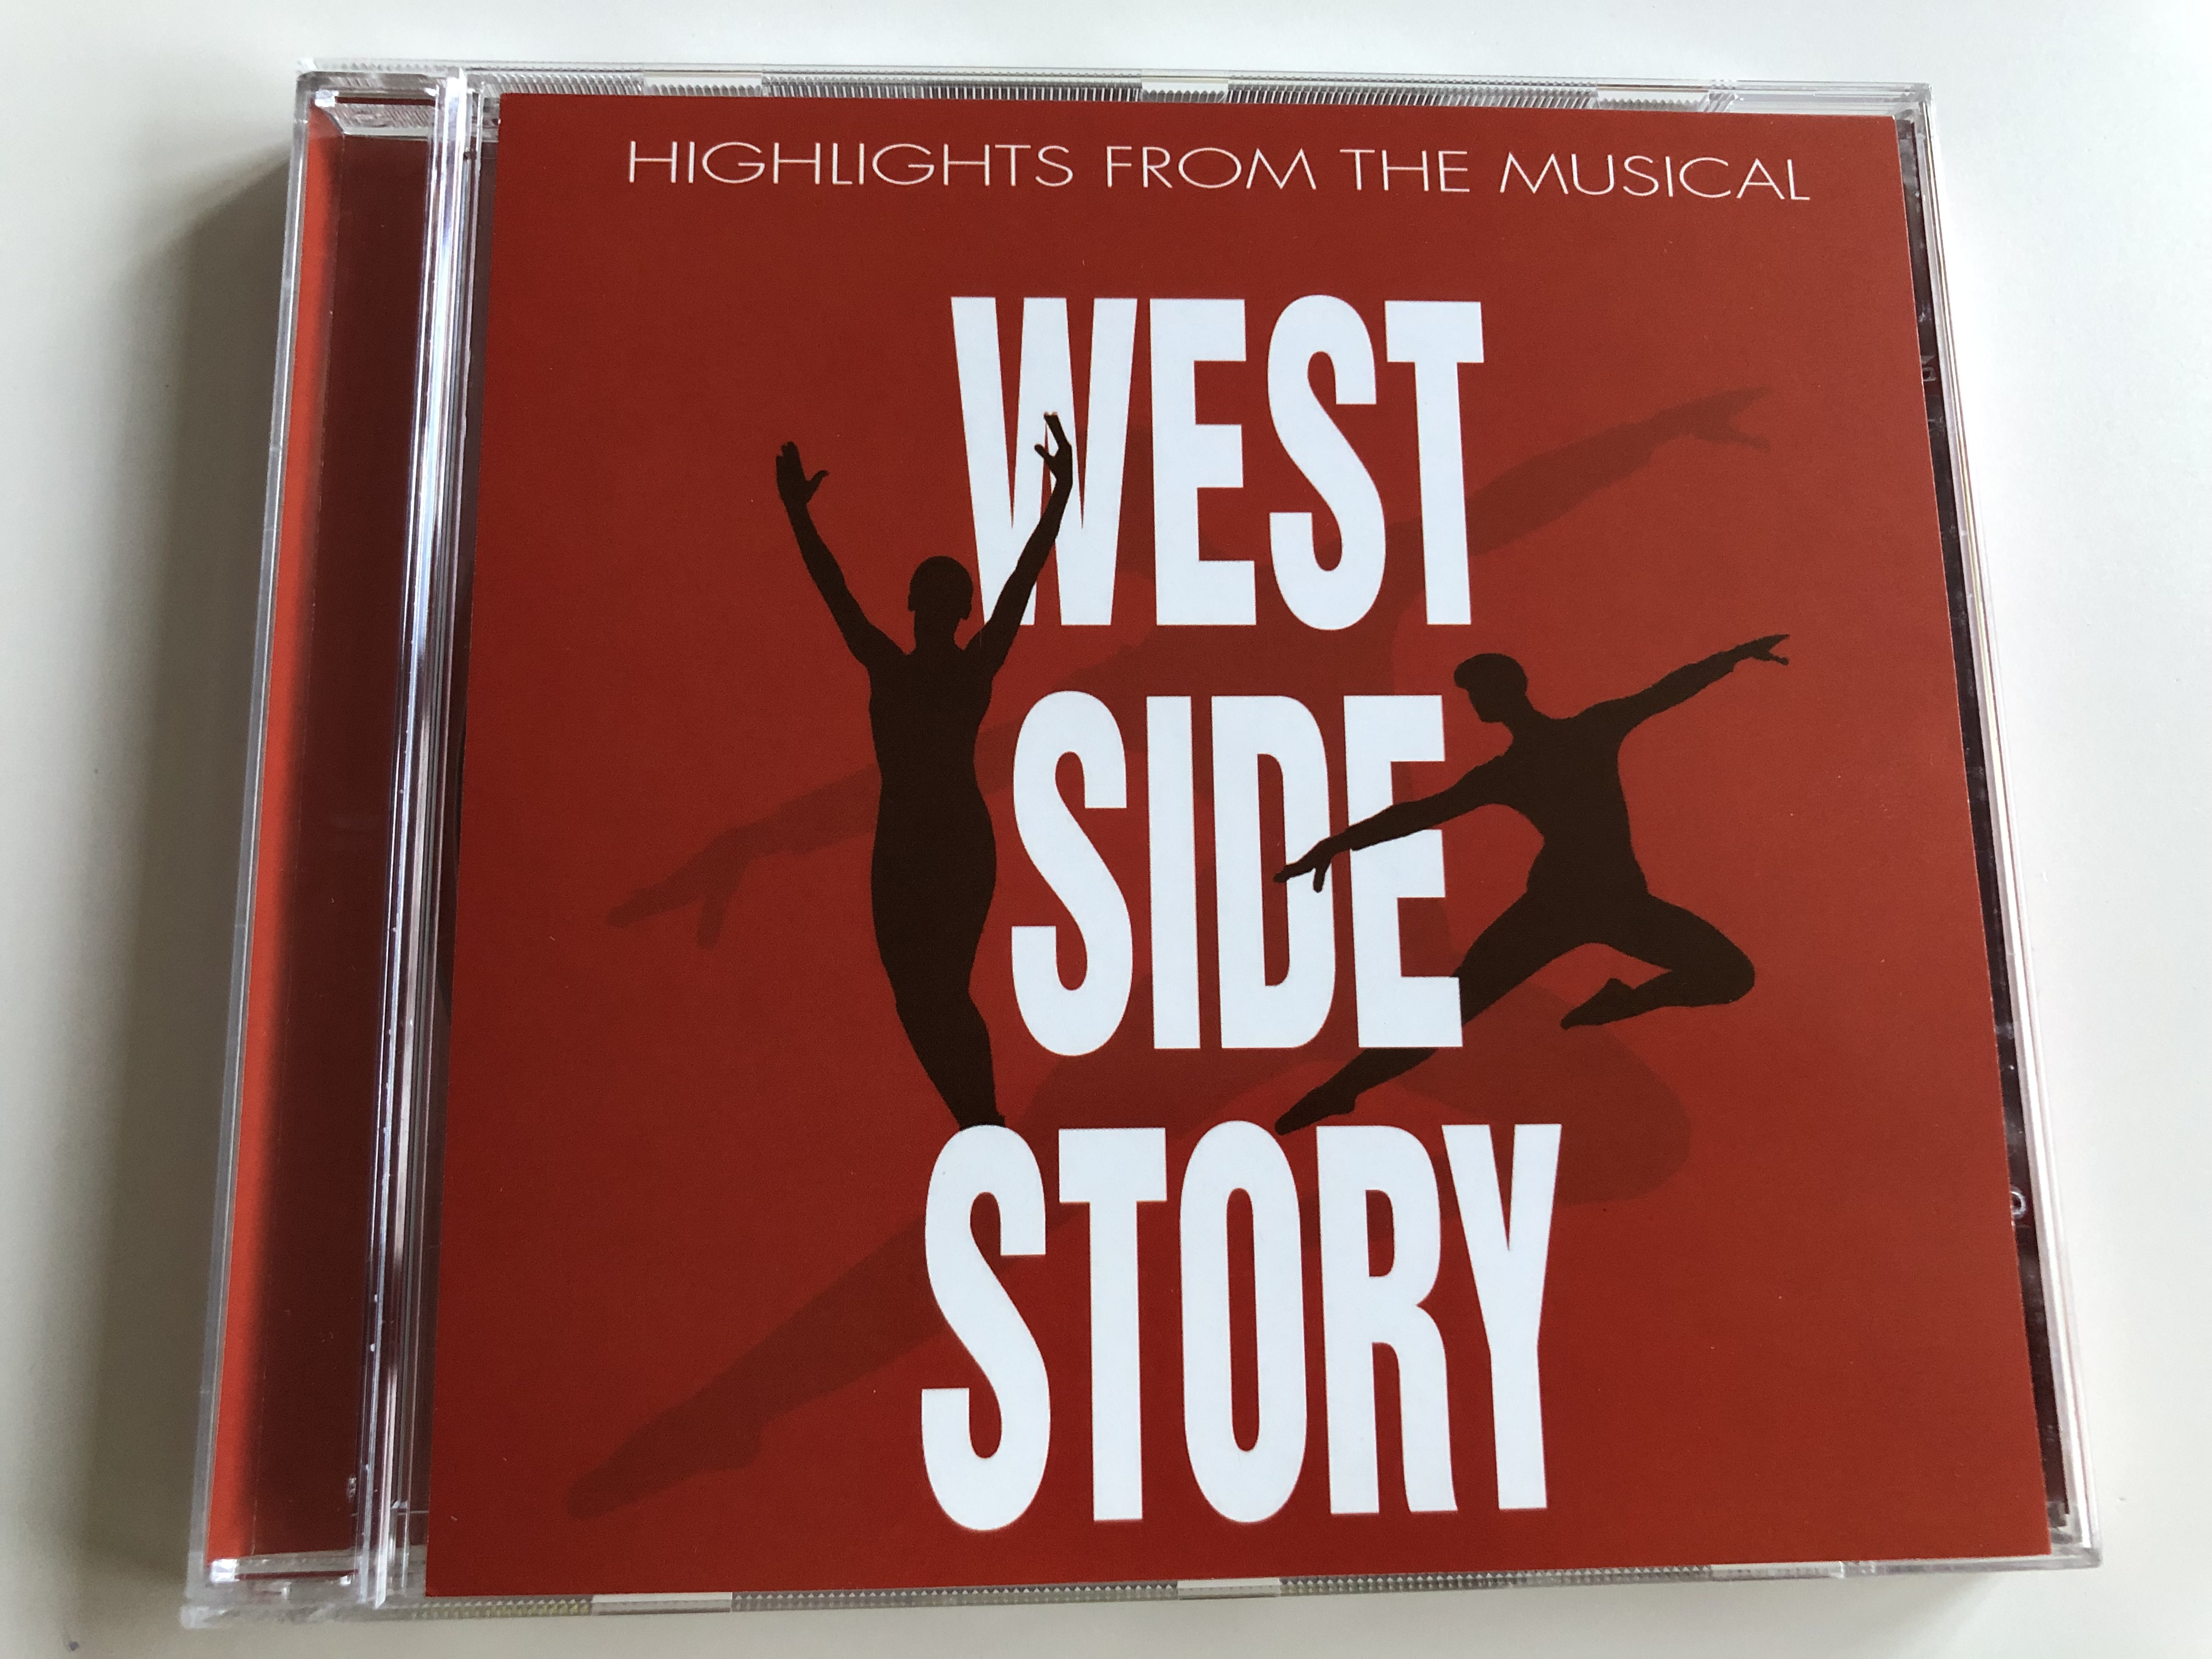 west-side-story-highlights-from-the-musical-something-s-coming-maria-tonight-america-cool-rumble-audio-cd-2003-142.023-lc10922-1-.jpg